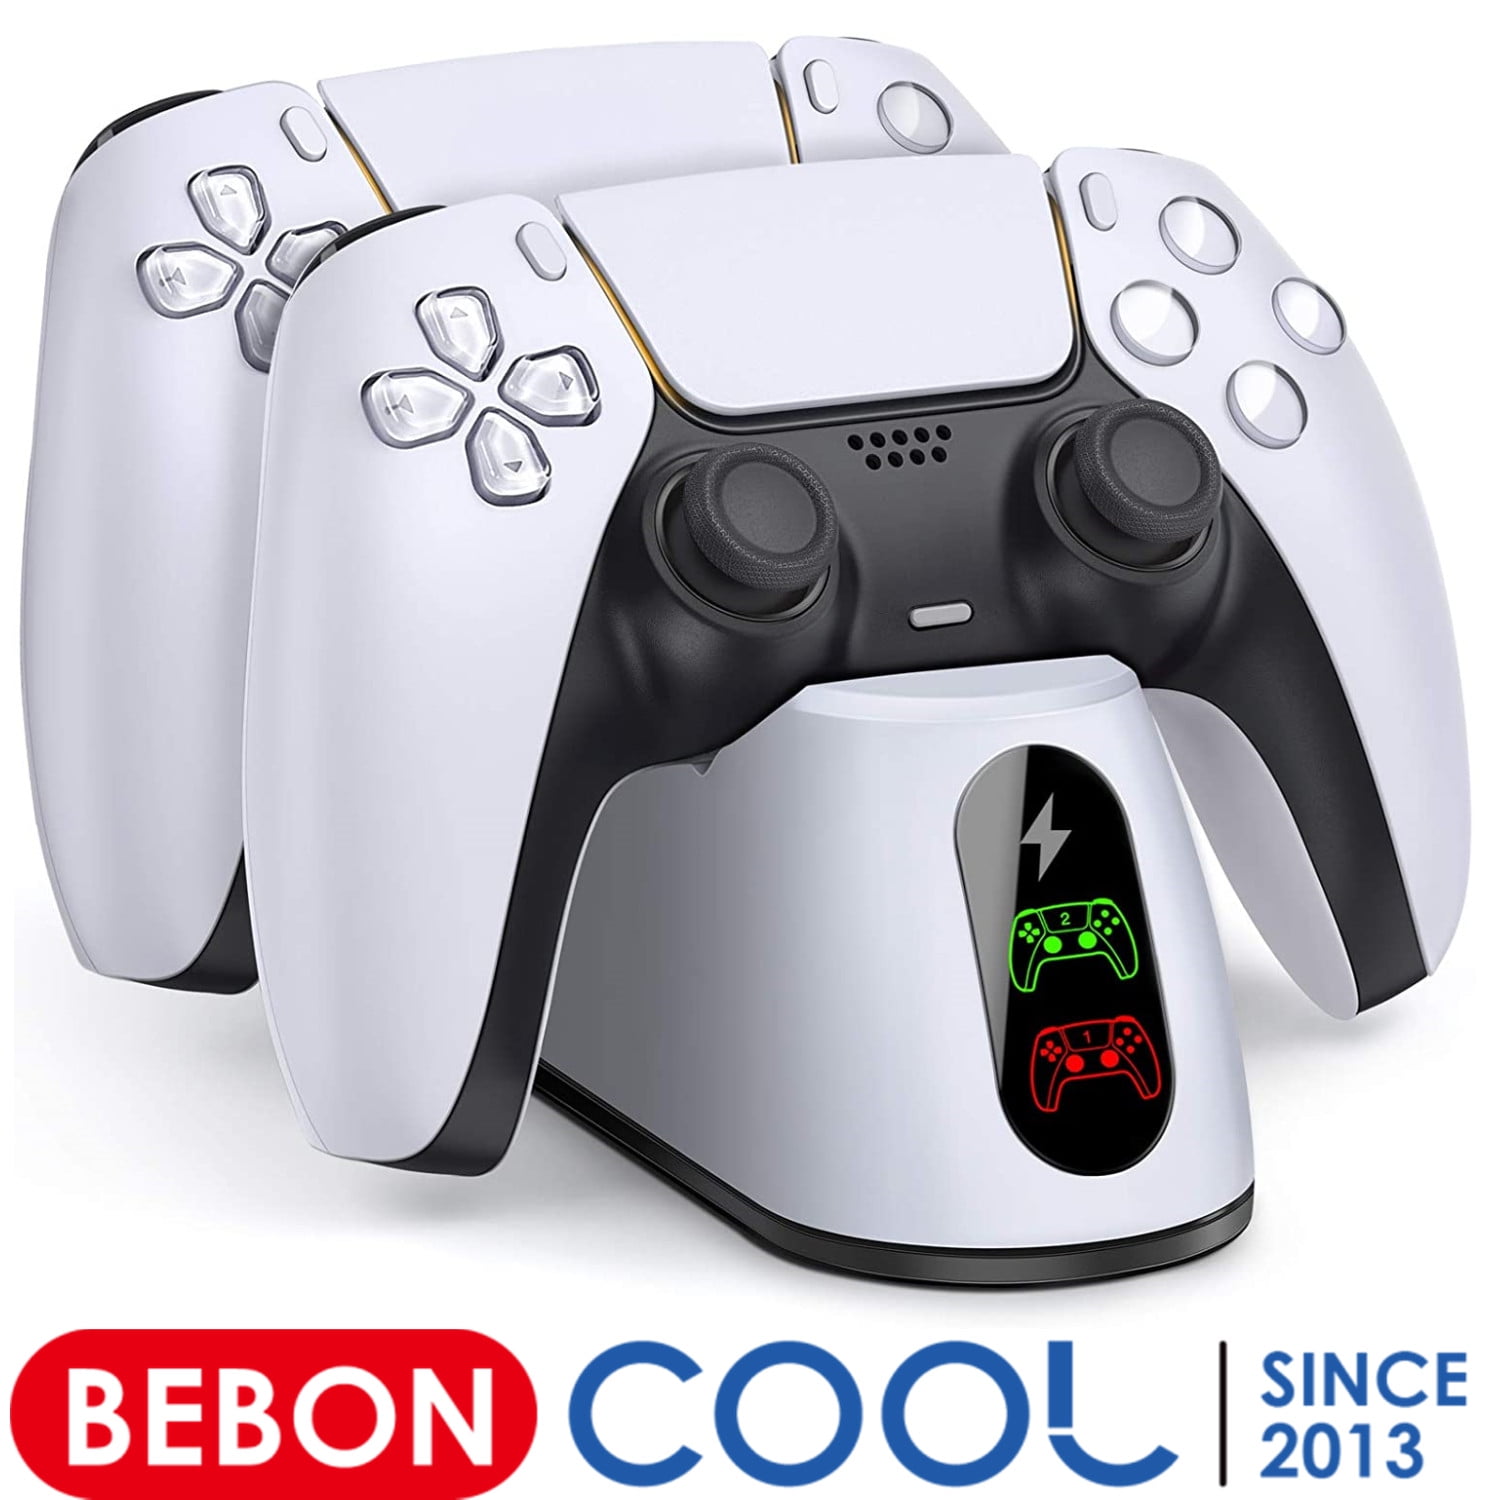 PS5 Controller Charger Station,Playstation 5 Charging Station with Fast Charging,BEBONCOOL Accessories with LED Indicator - White Walmart.com